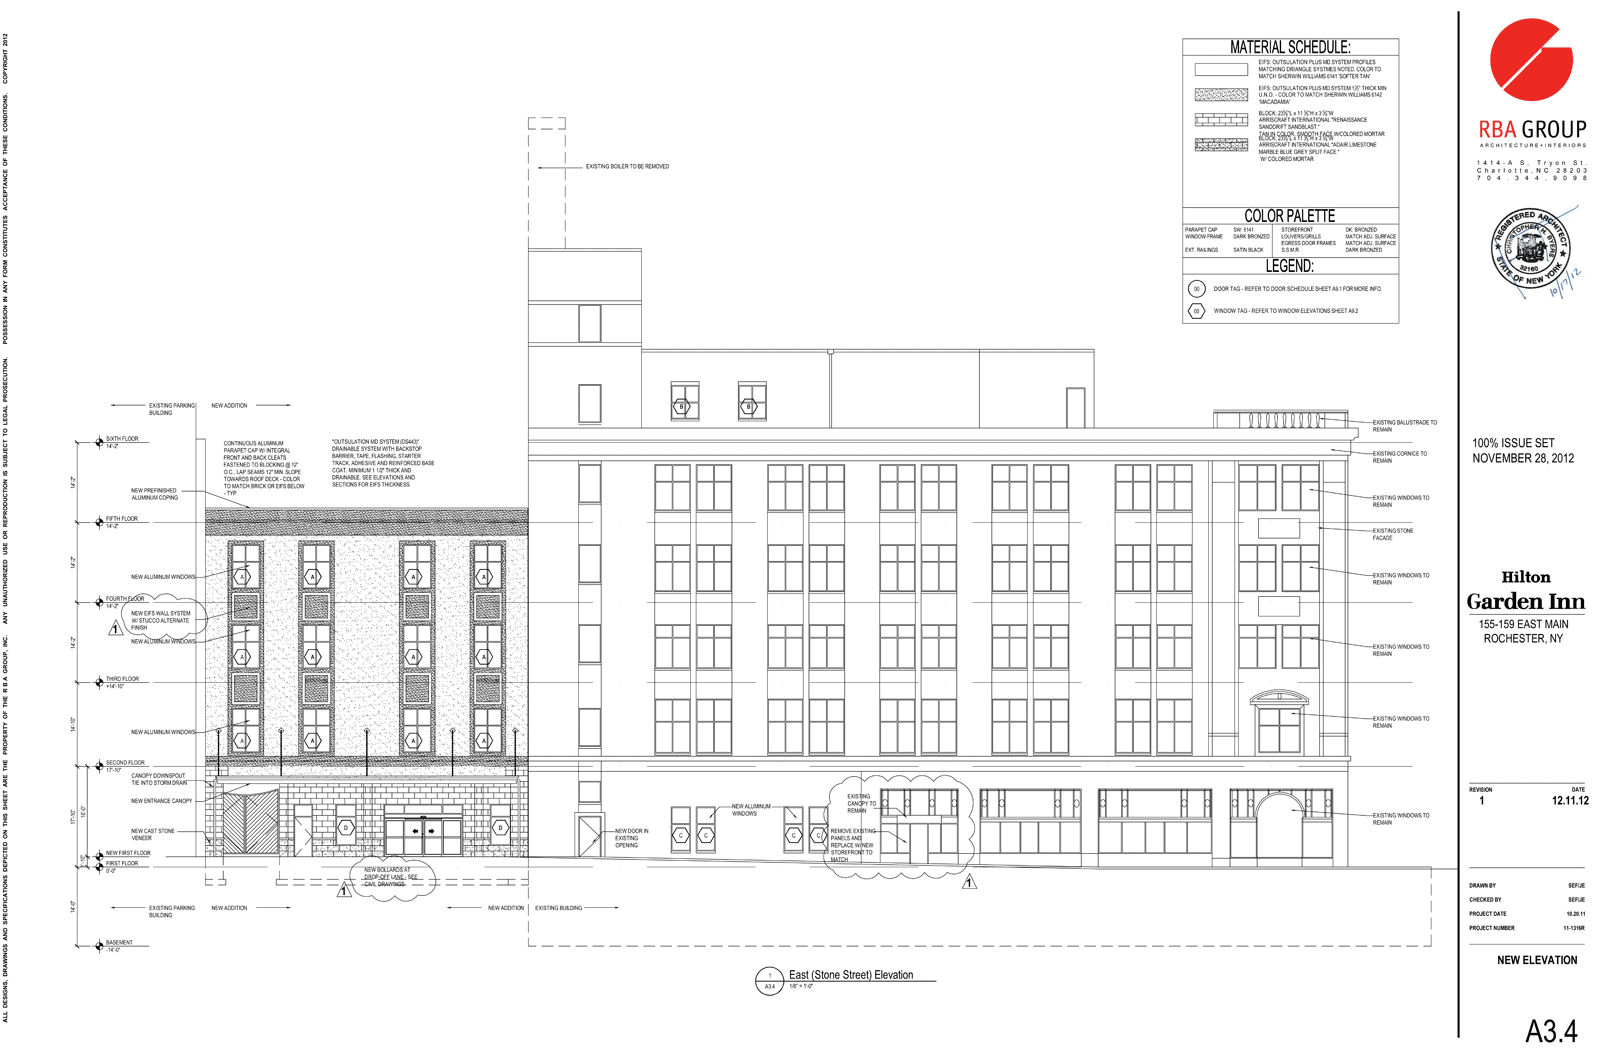 East elevation drawing. The former Stone Street Grill will be demolished and replaced with a new four-story addition for more hotel rooms. [Image: The RBA Group]